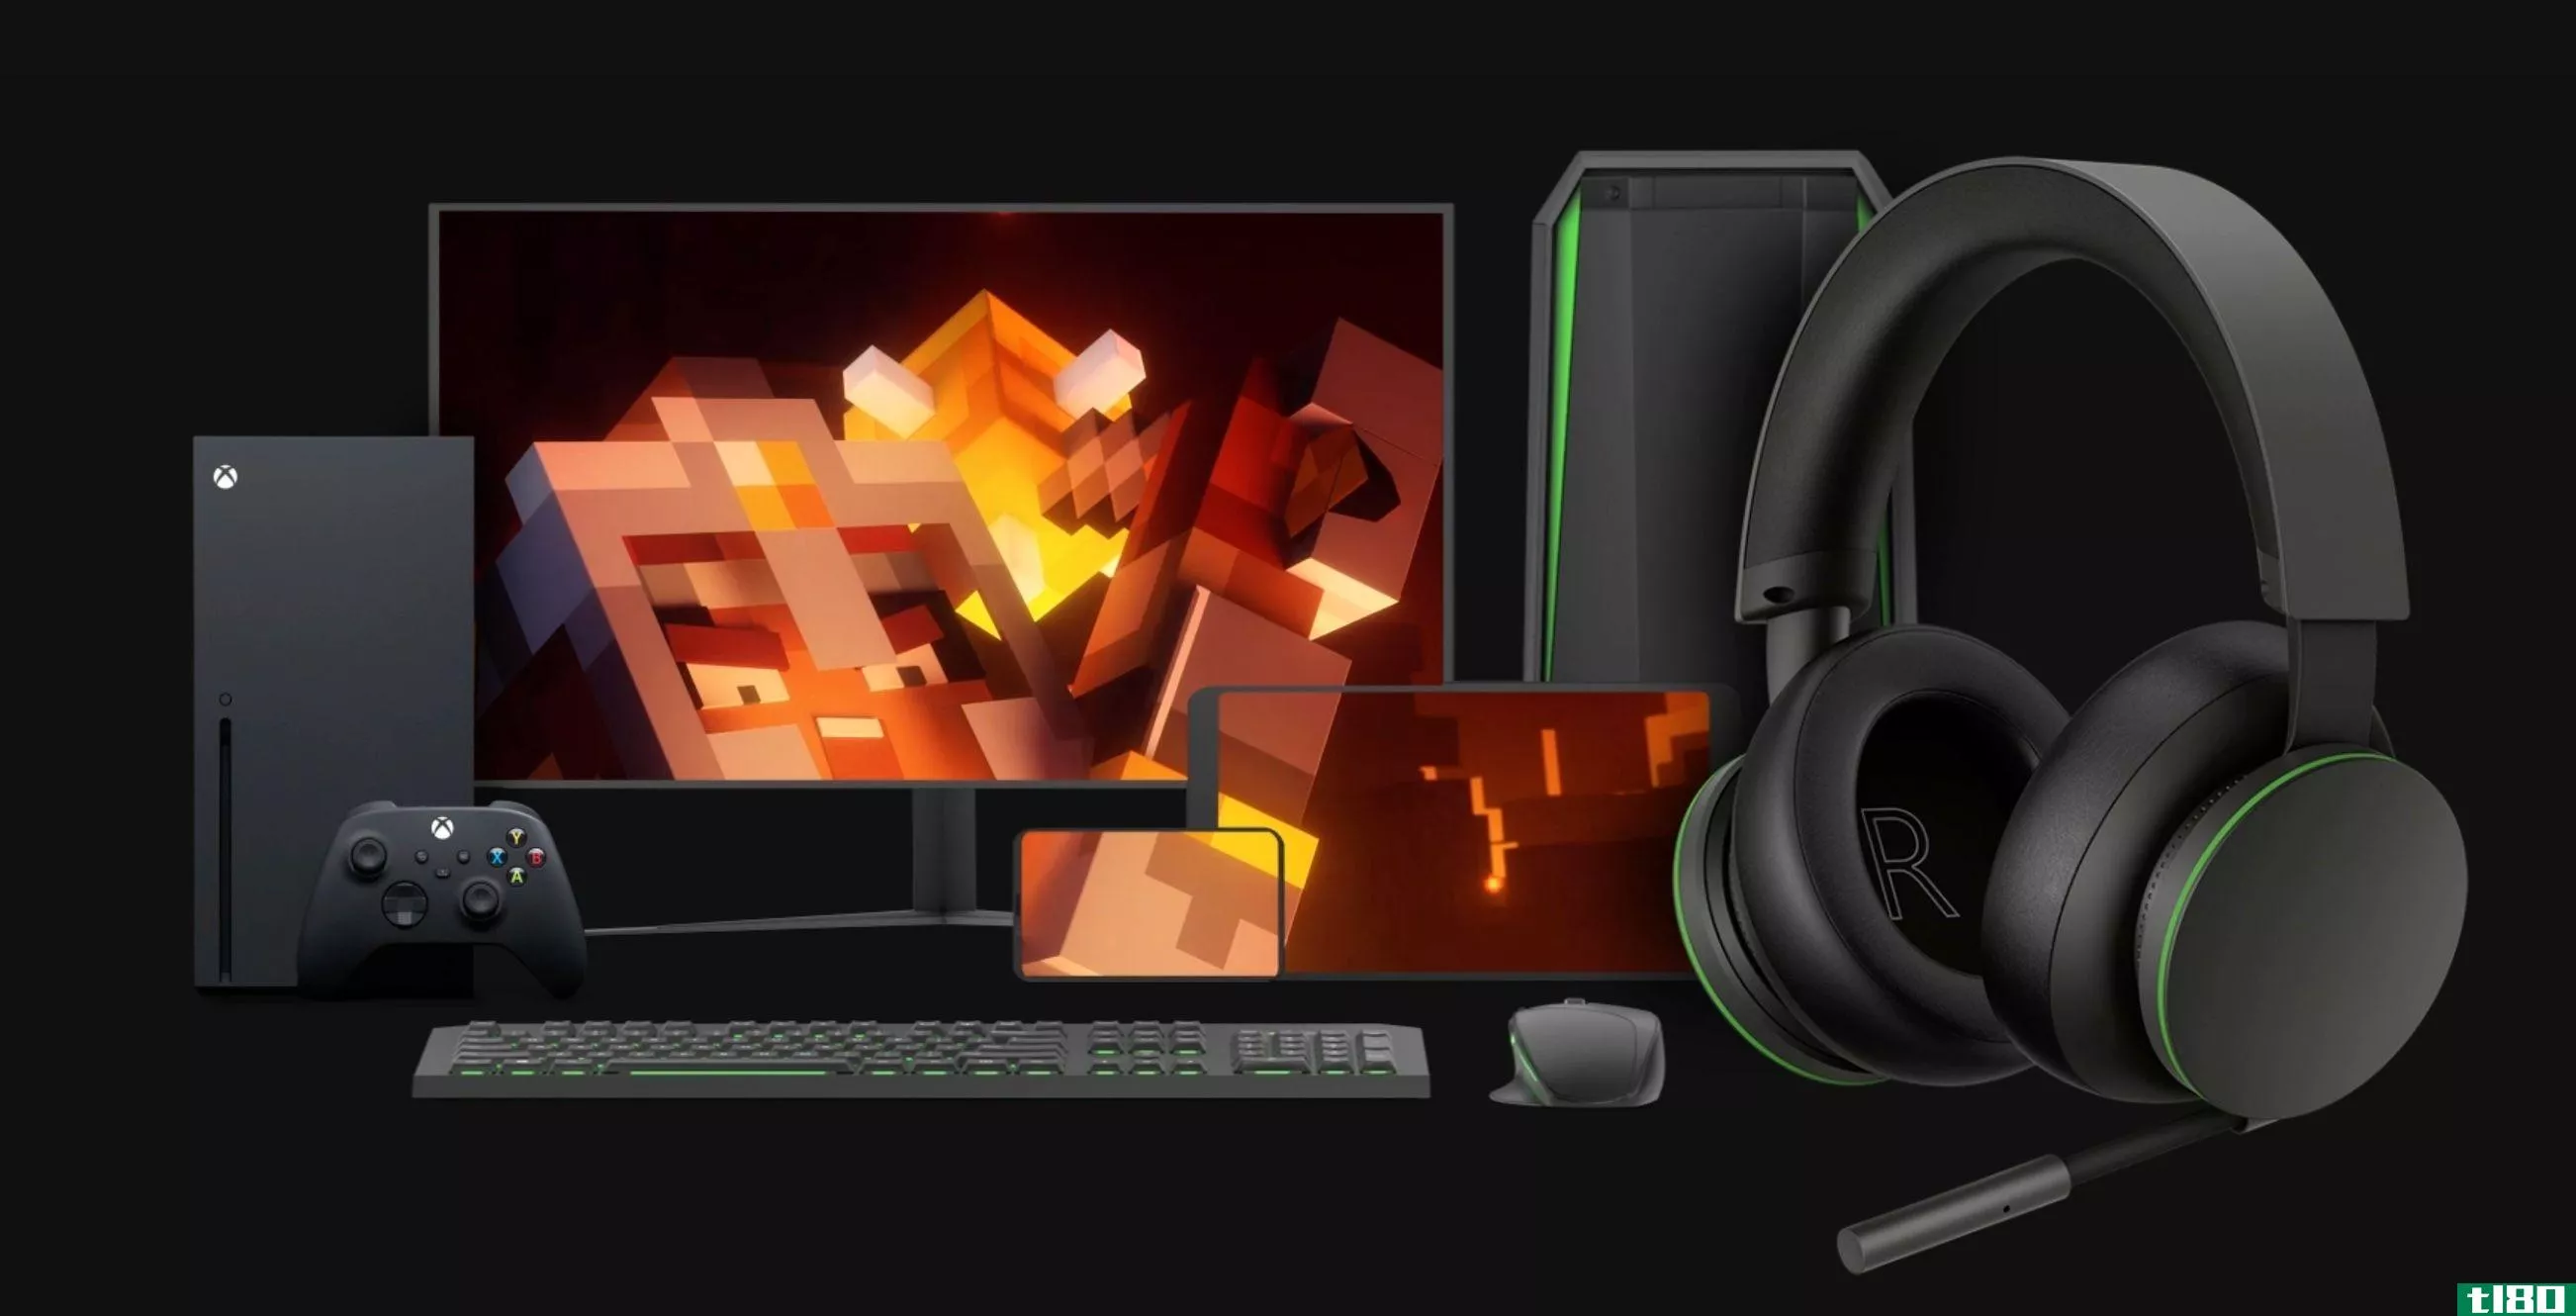 Xbox Wireless Headset compatibility across PC, Xbox and mobile